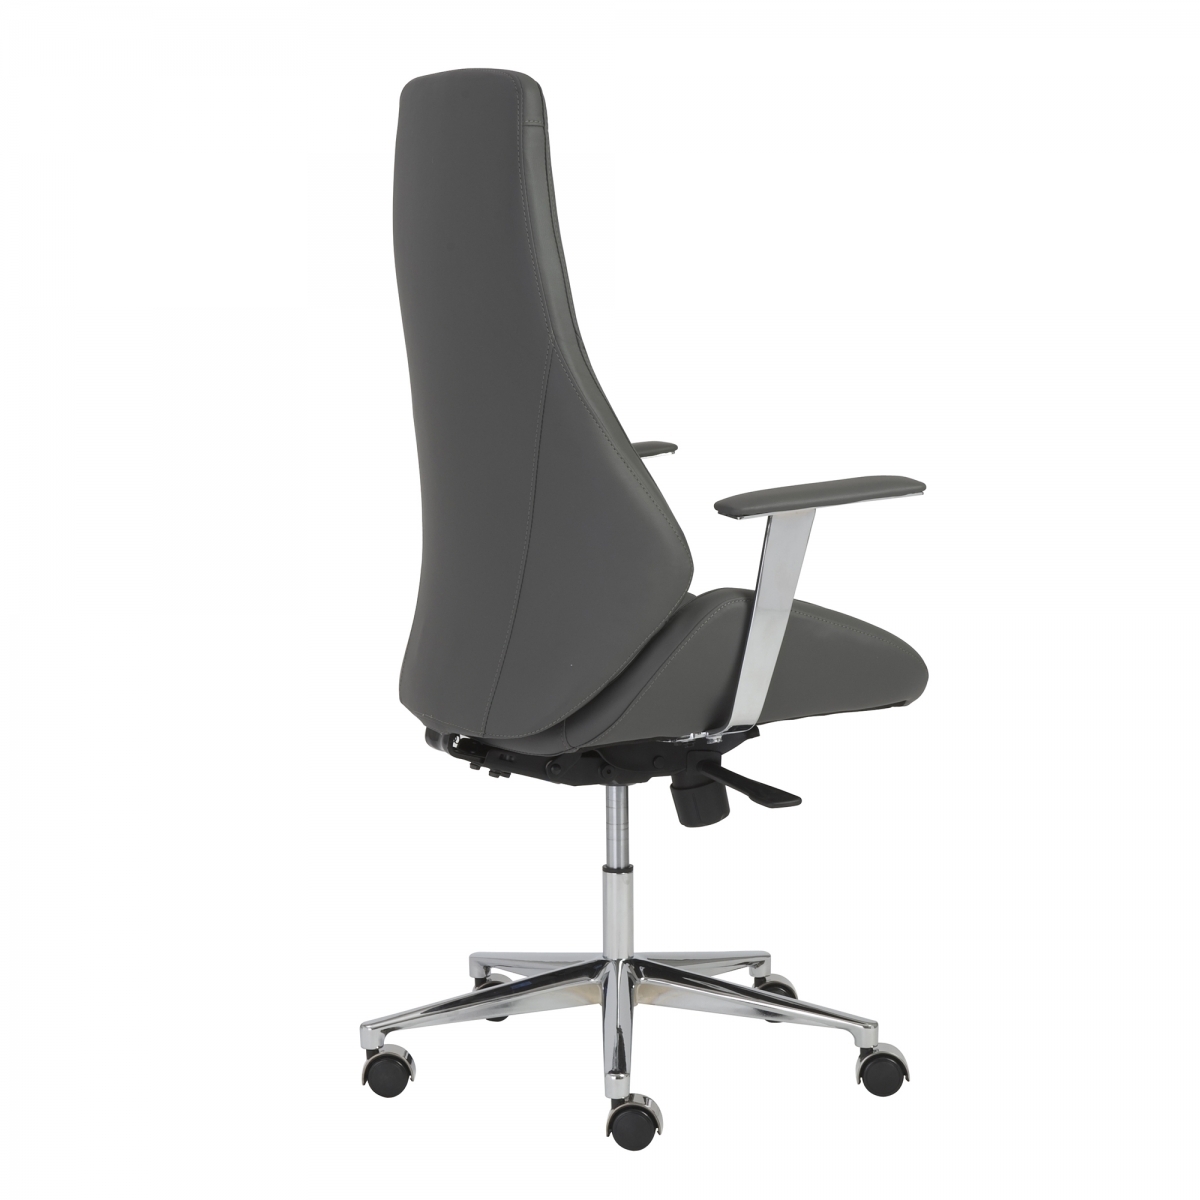 Bergen High Back Executive Chair -In Stock # 1003-S